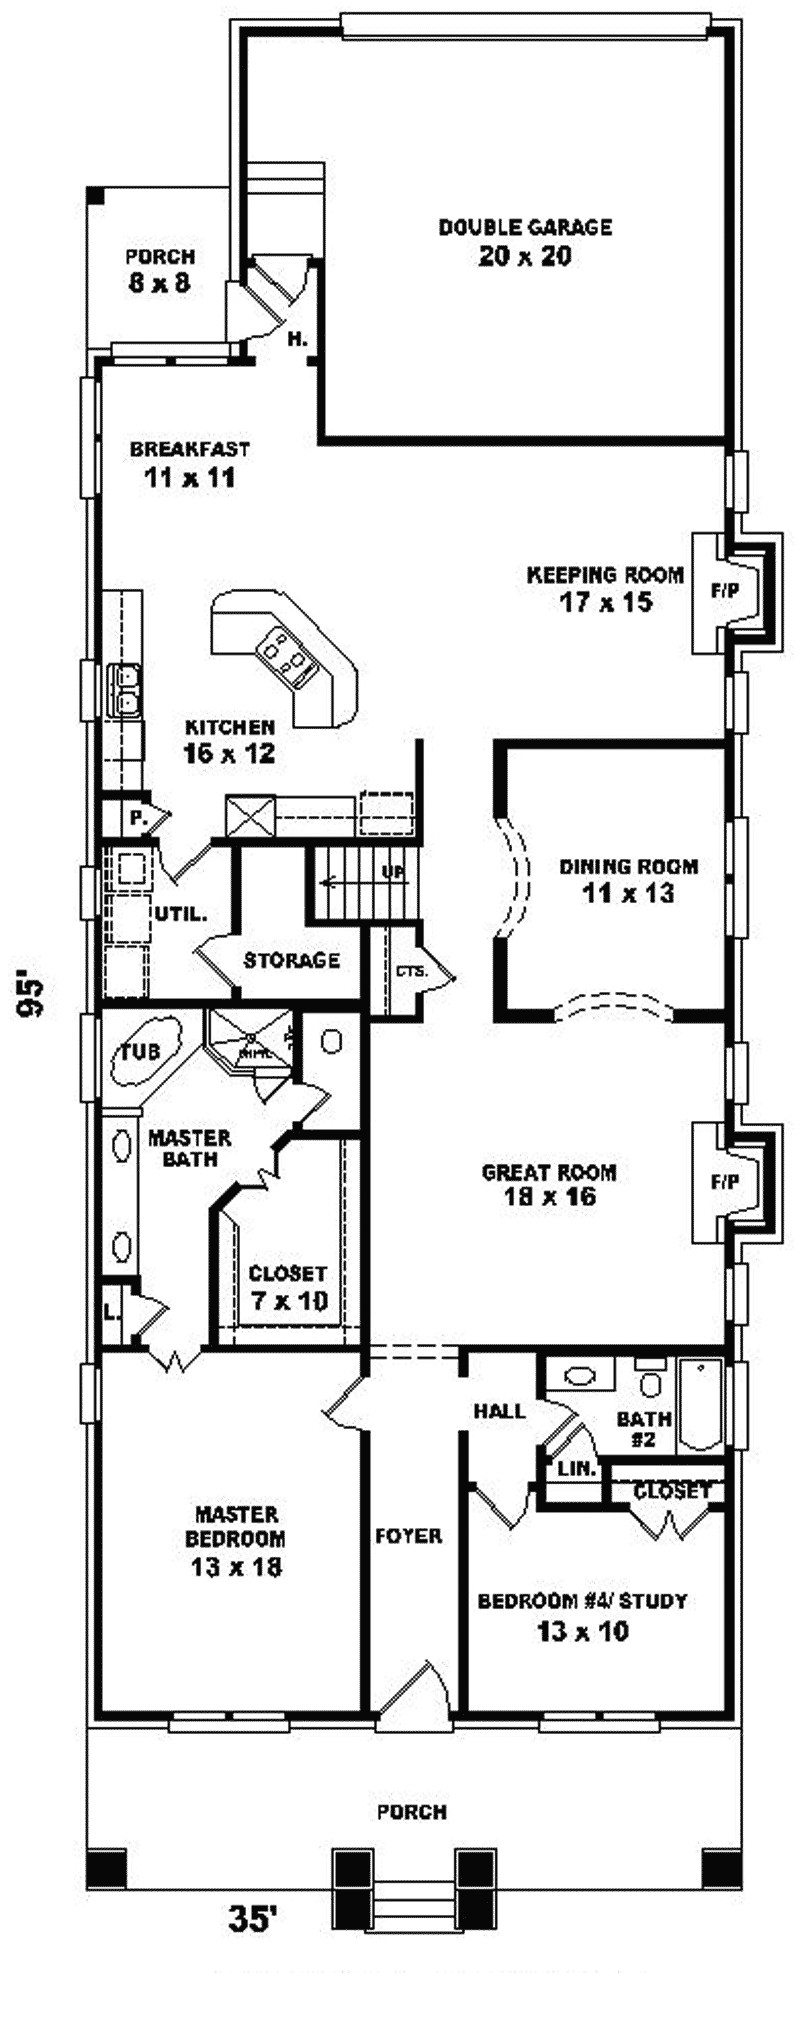 House Plans for A Small Lot Lovely Home Plans for Narrow Lots 5 Narrow Lot Lake House